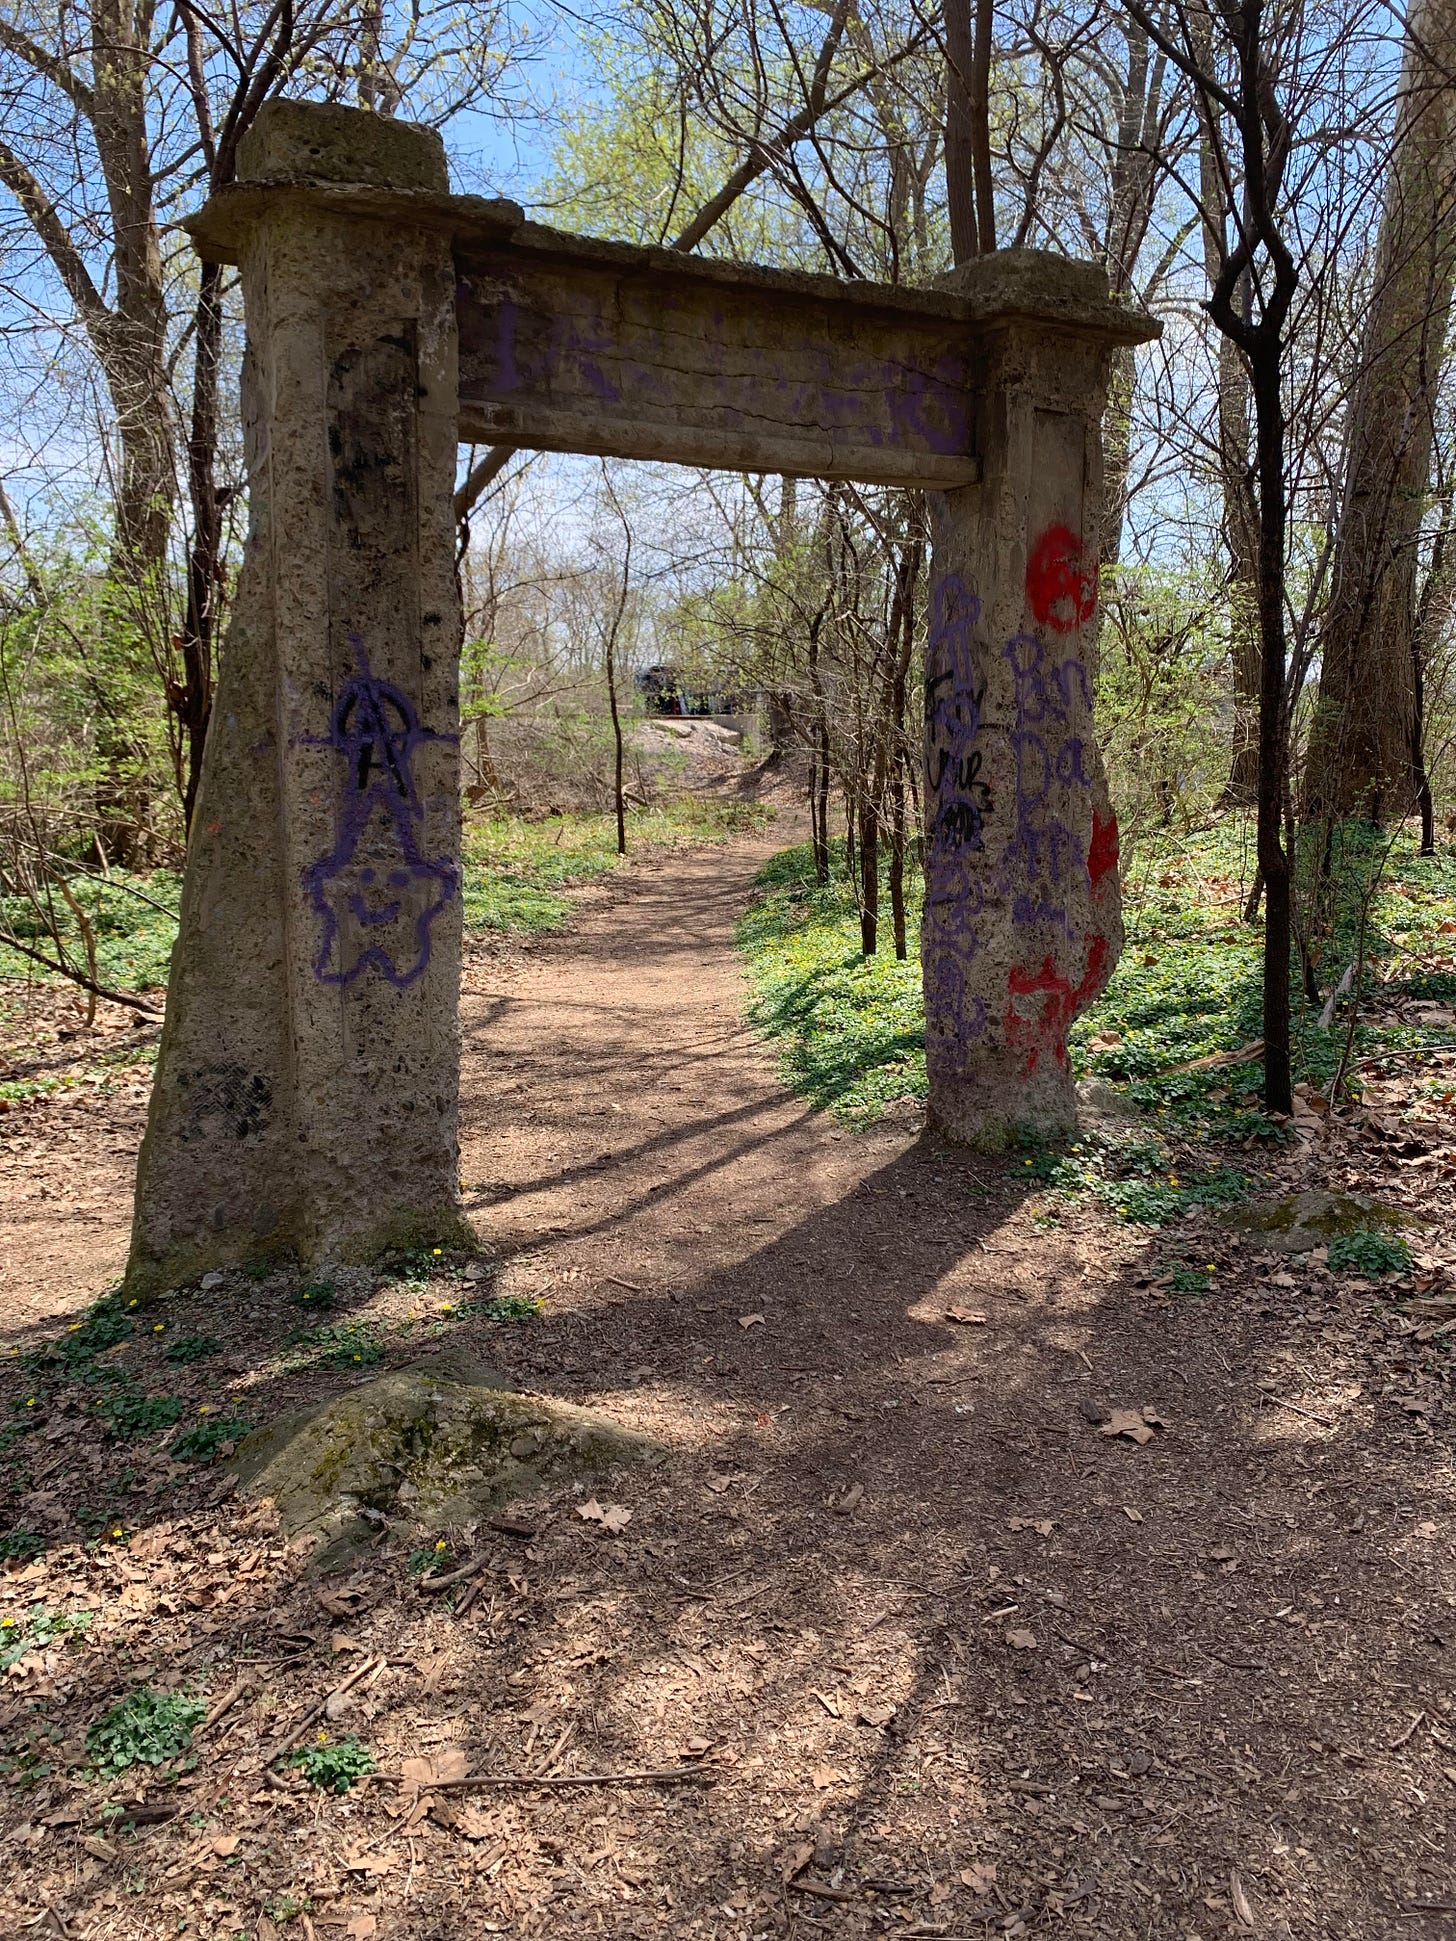 A weathered and graffitied stone archway in the middle of a wooded path